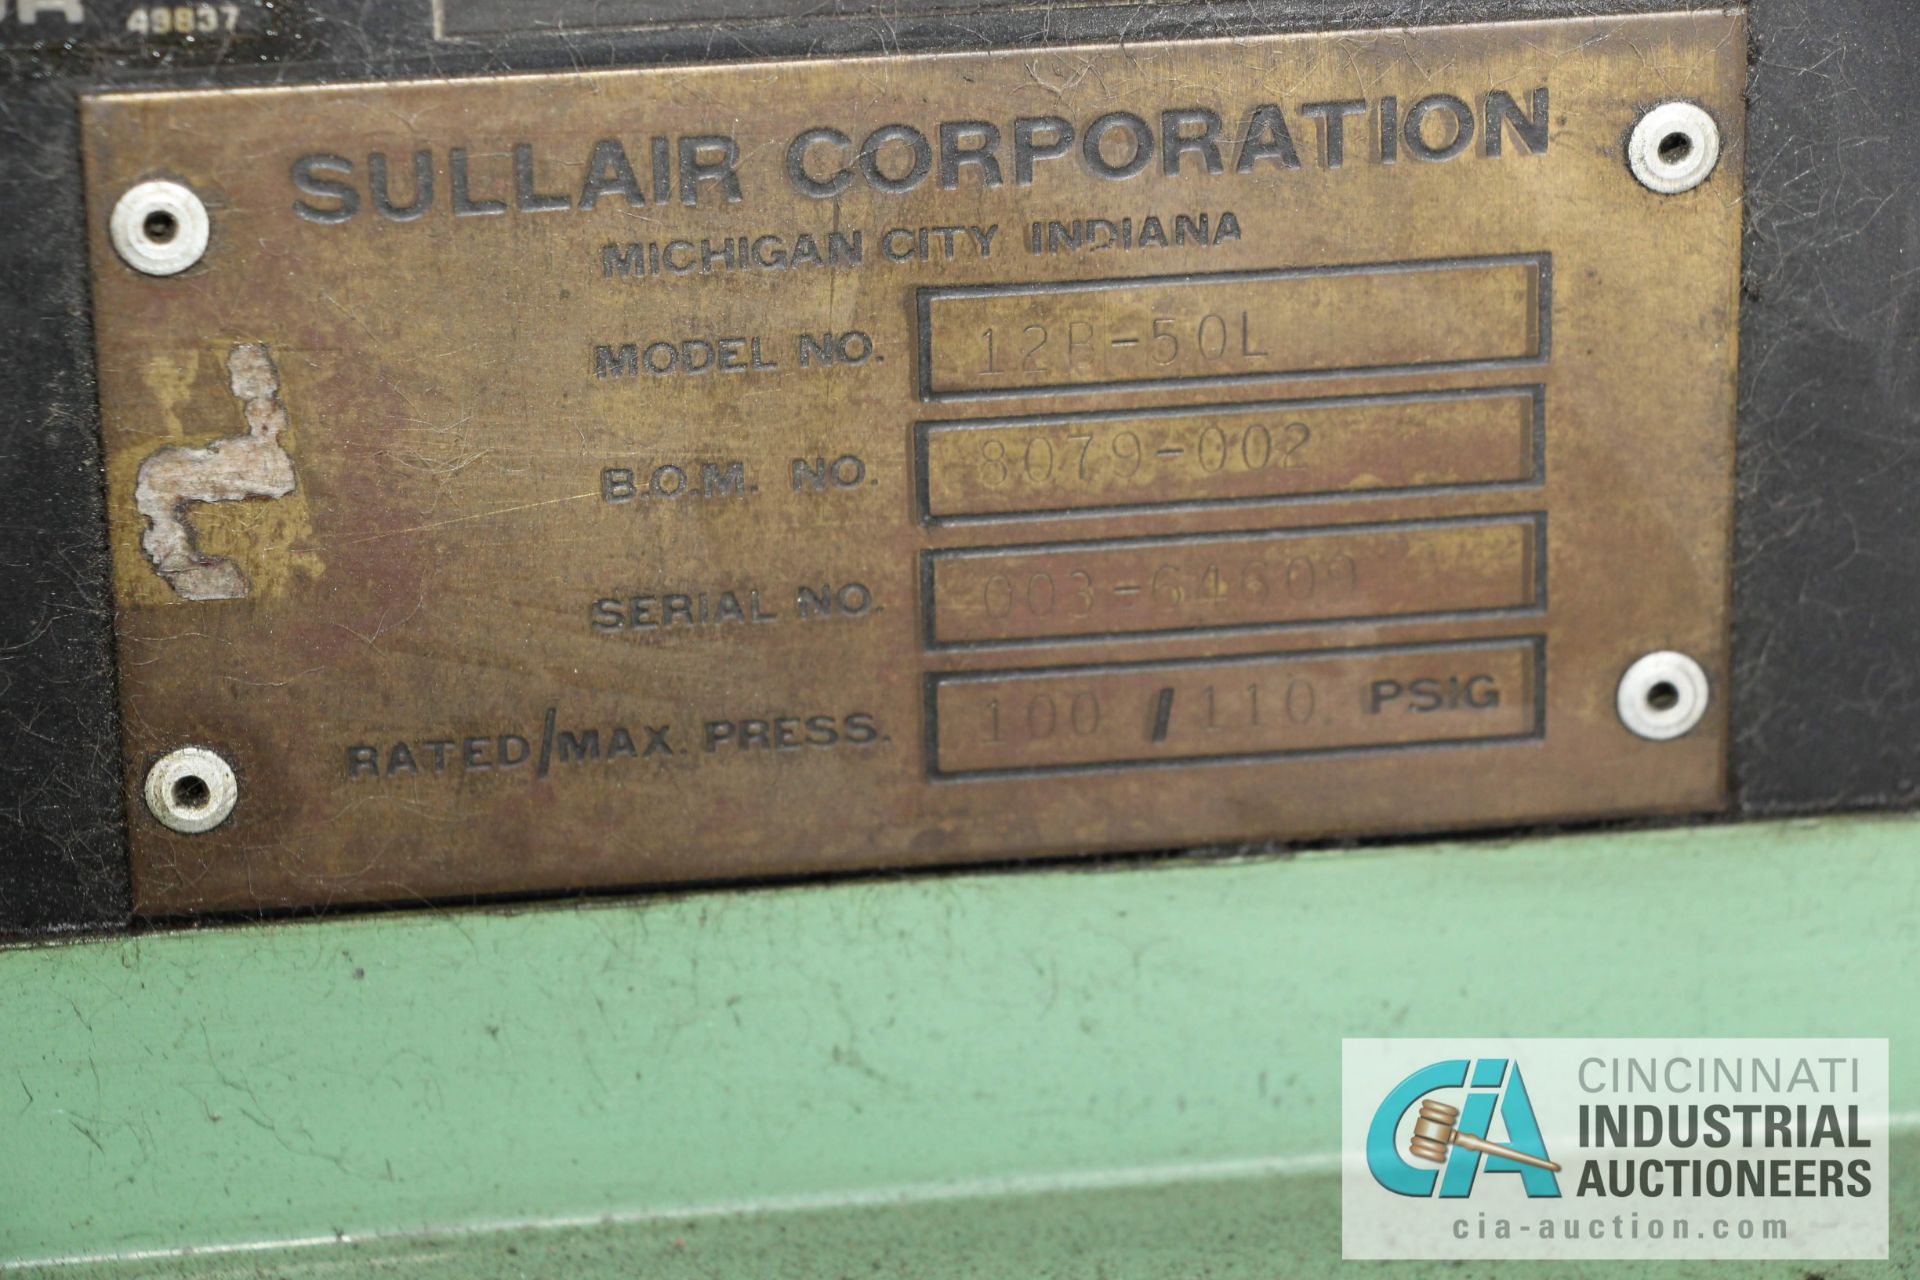 50 HP SULLAIR MODEL 12B-50L ROTARY SCREW AIR COMPRESOR - $50.00 Rigging Fee Due to Onsite Rigger - - Image 2 of 3